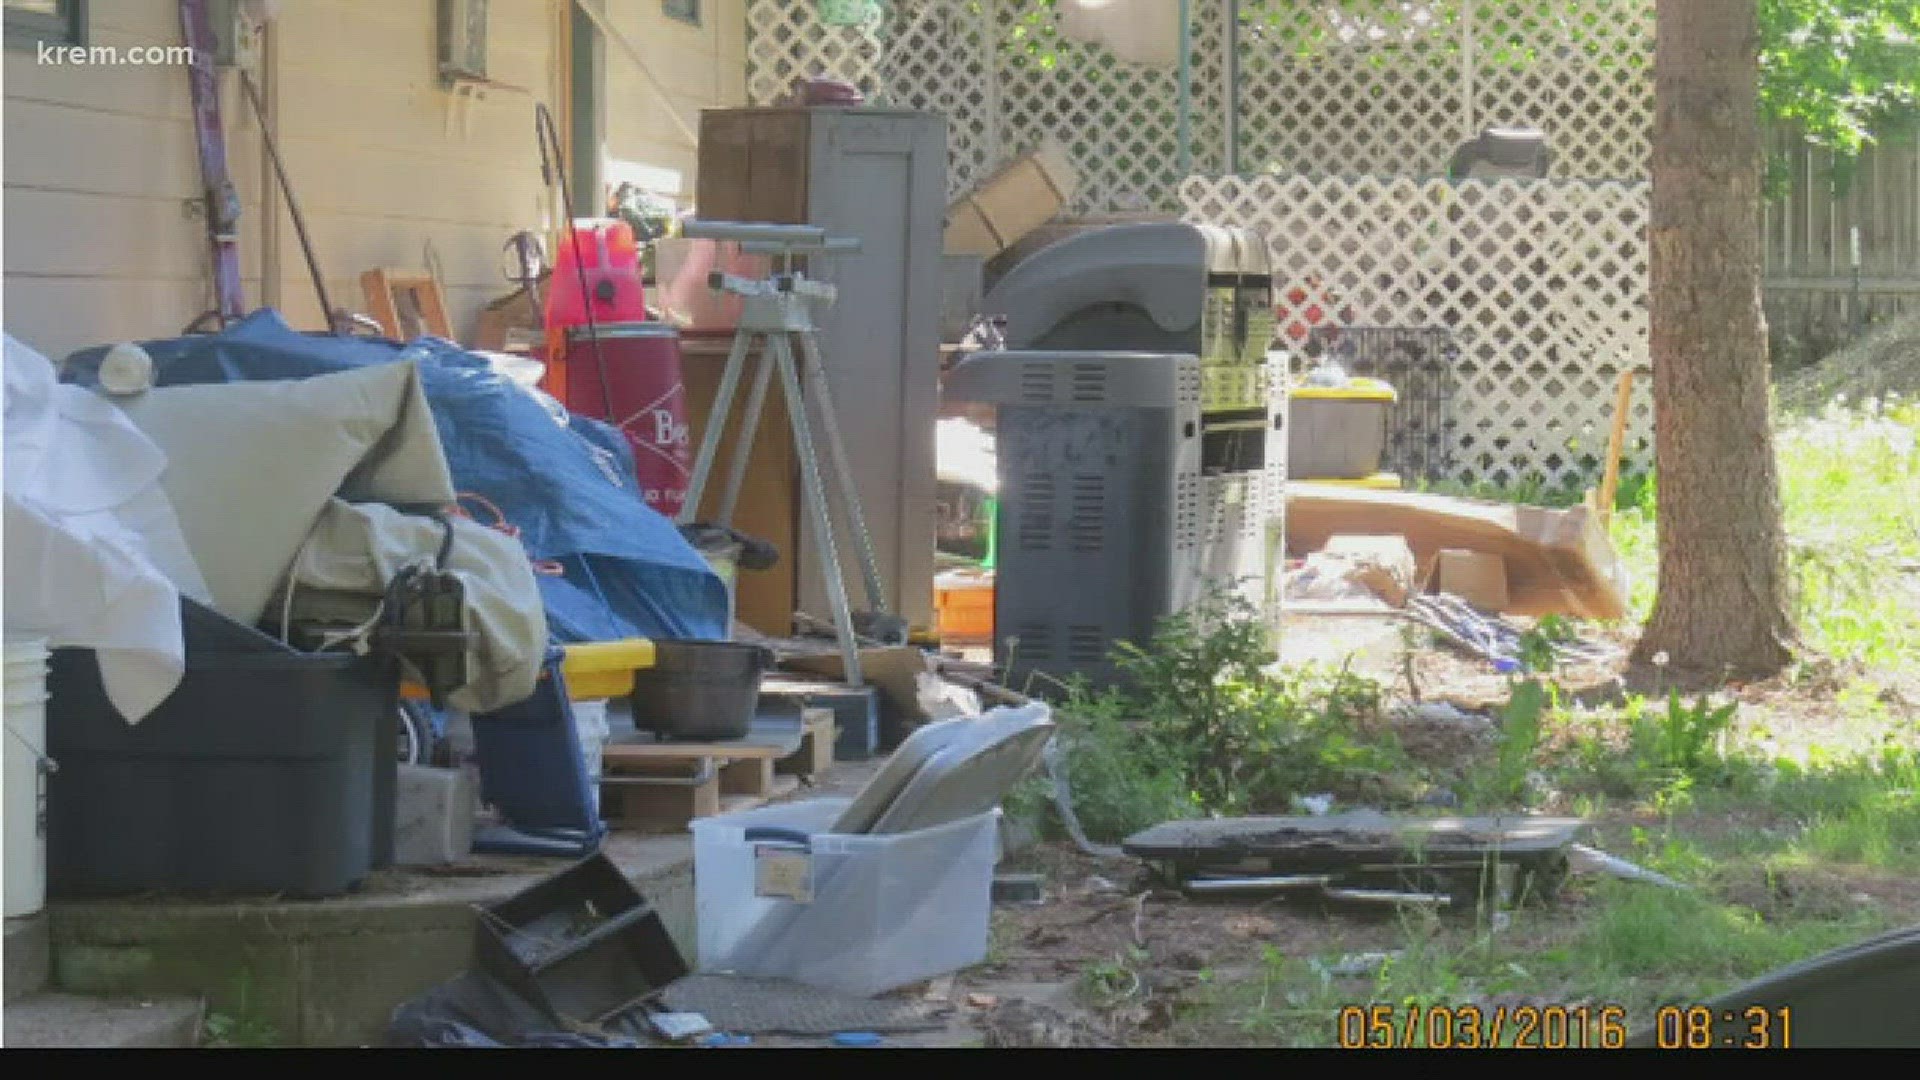 The Spokane Valley City Council passed two nuisance property ordinances Tuesday night. Both give the city more options to shut down problem homes and clean up neighborhood eye sores